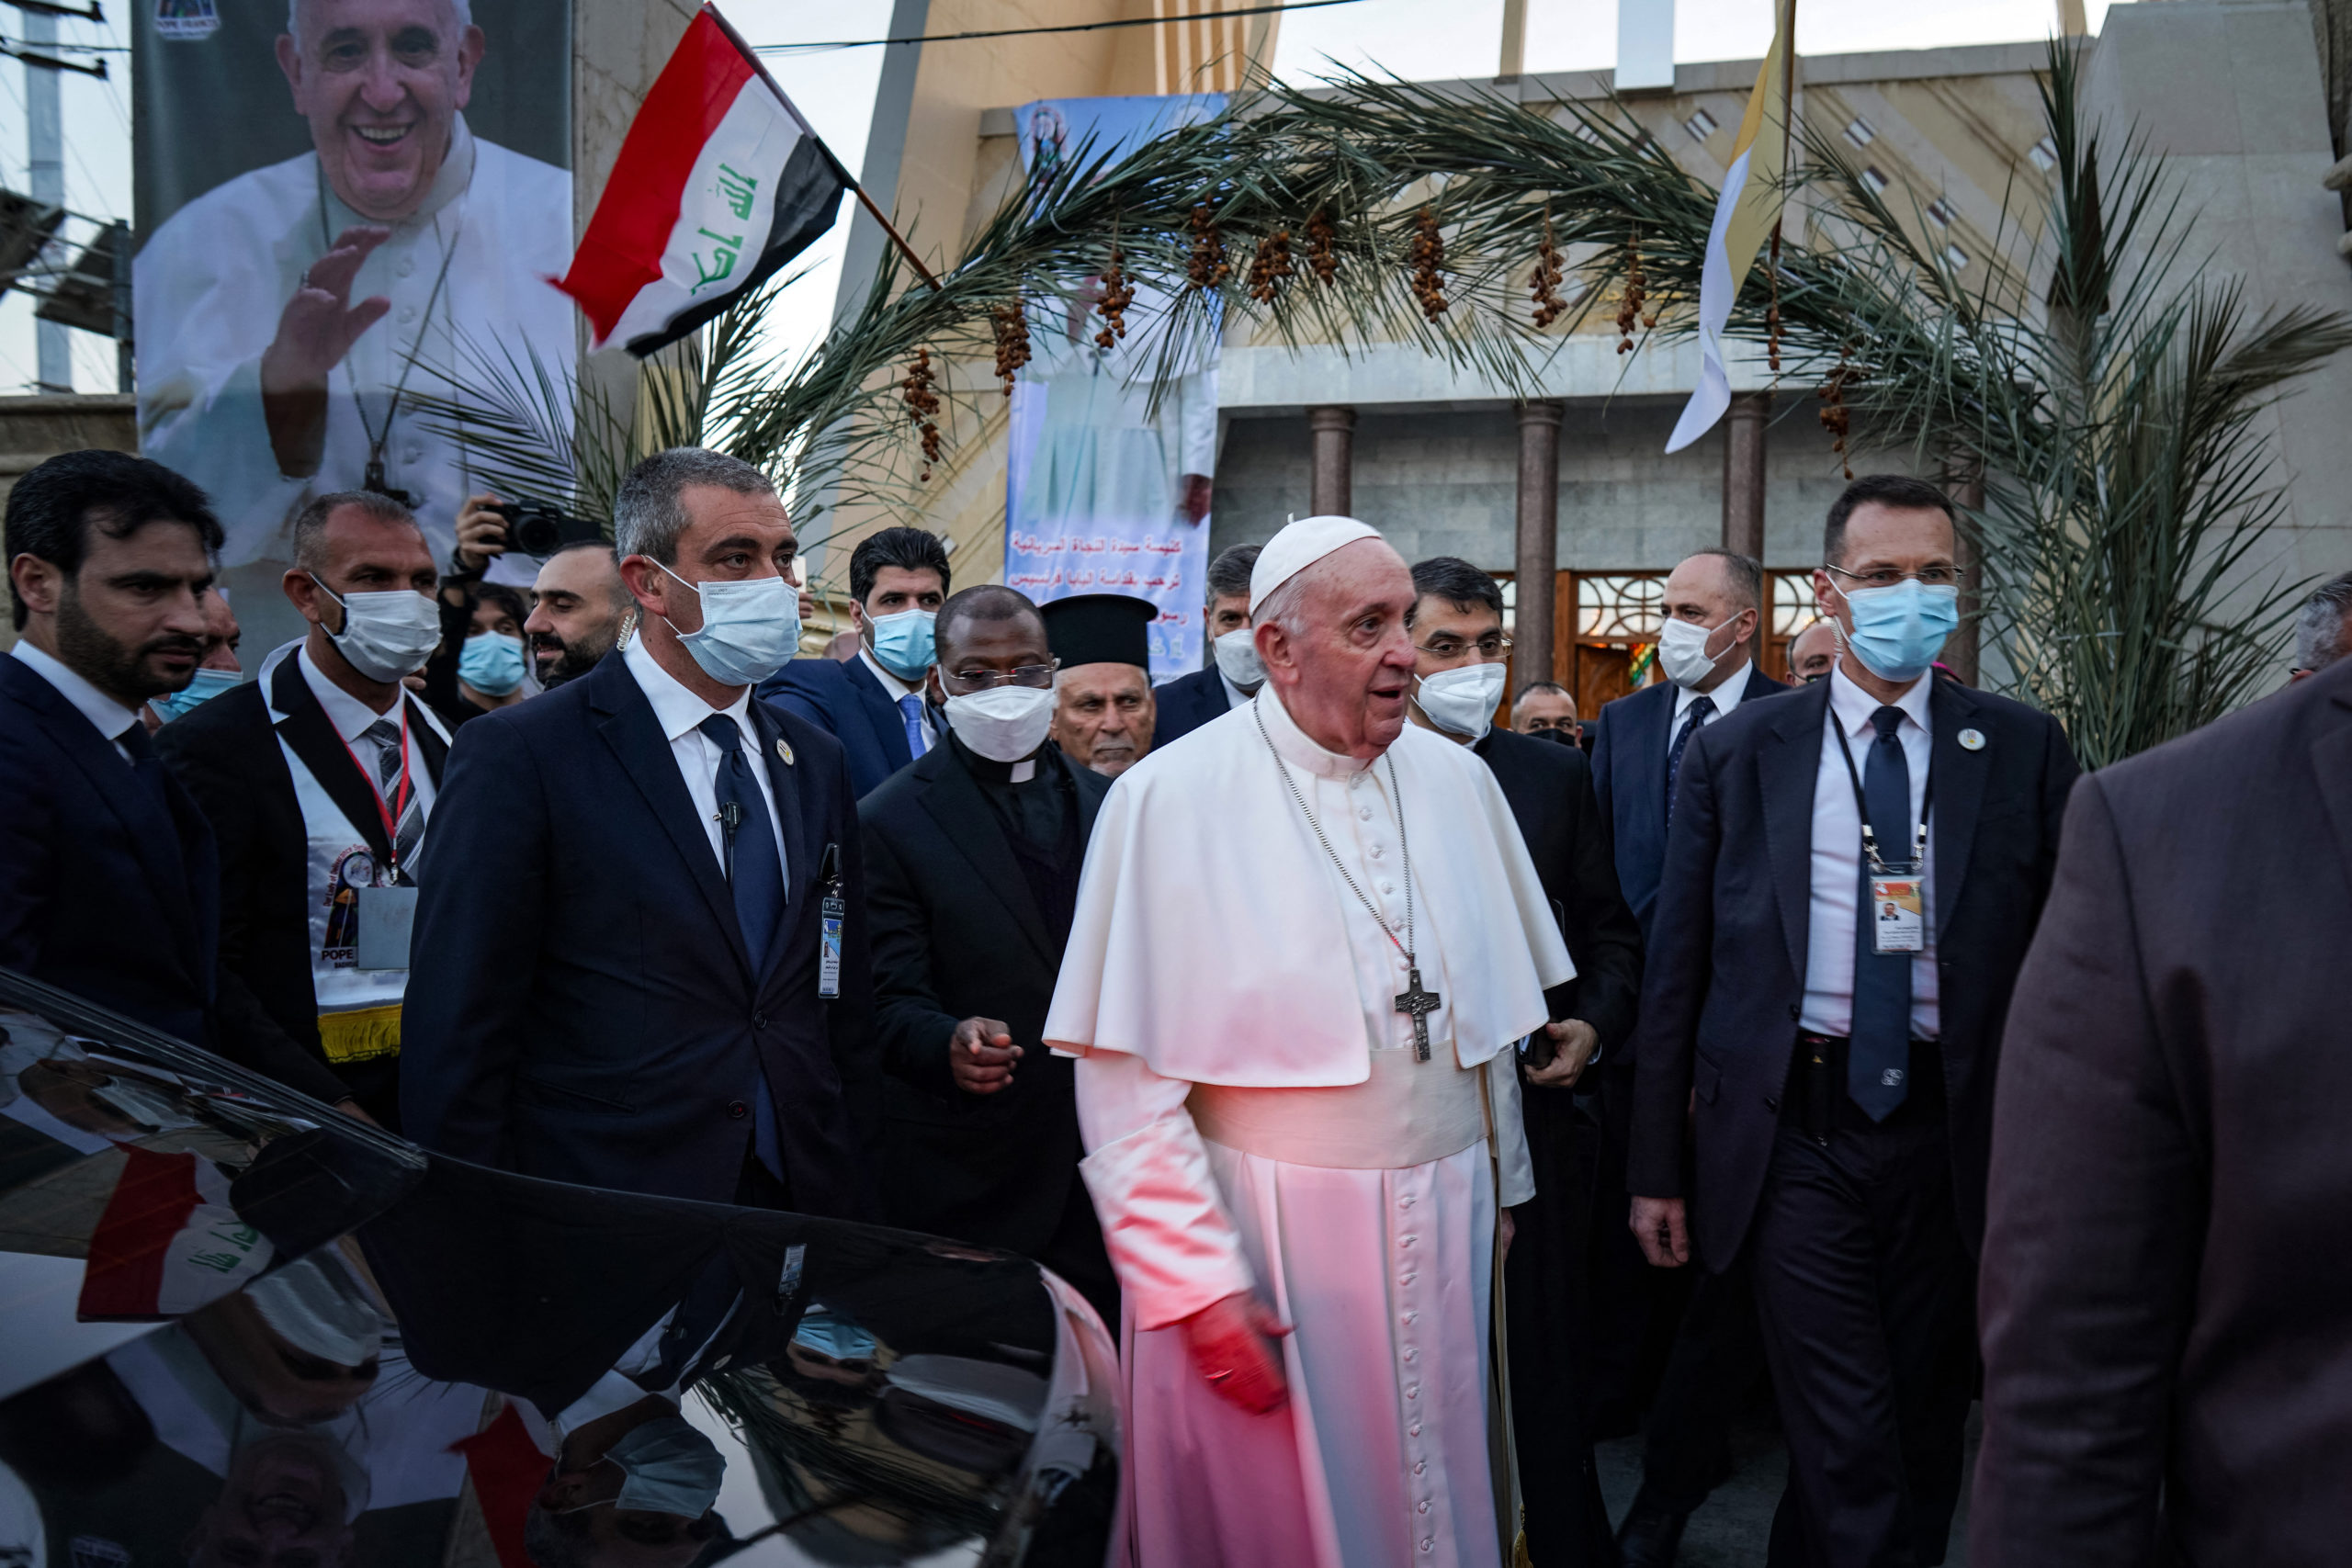 Pope Francis To Meet Top Cleric Sistani On Second Day In Iraq